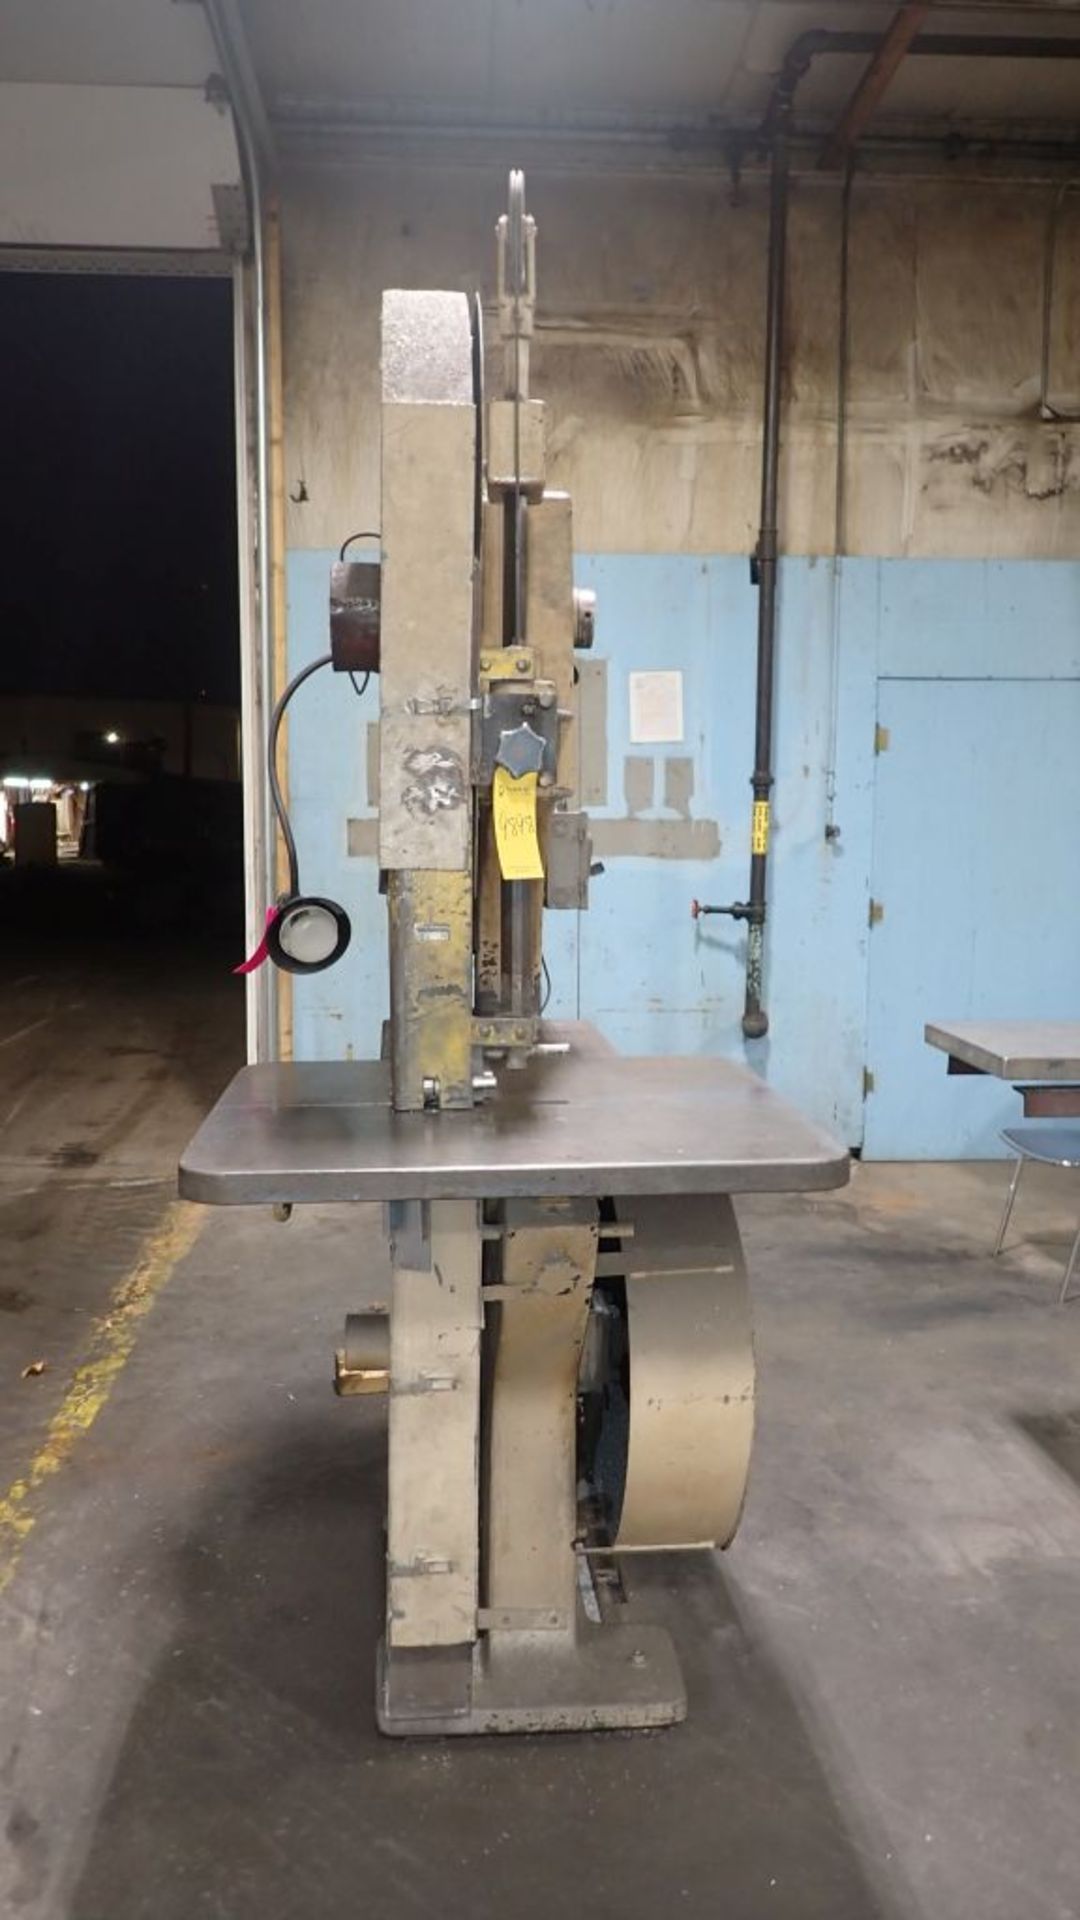 Defiance Bandsaw | Tag: 229898 - Image 2 of 6